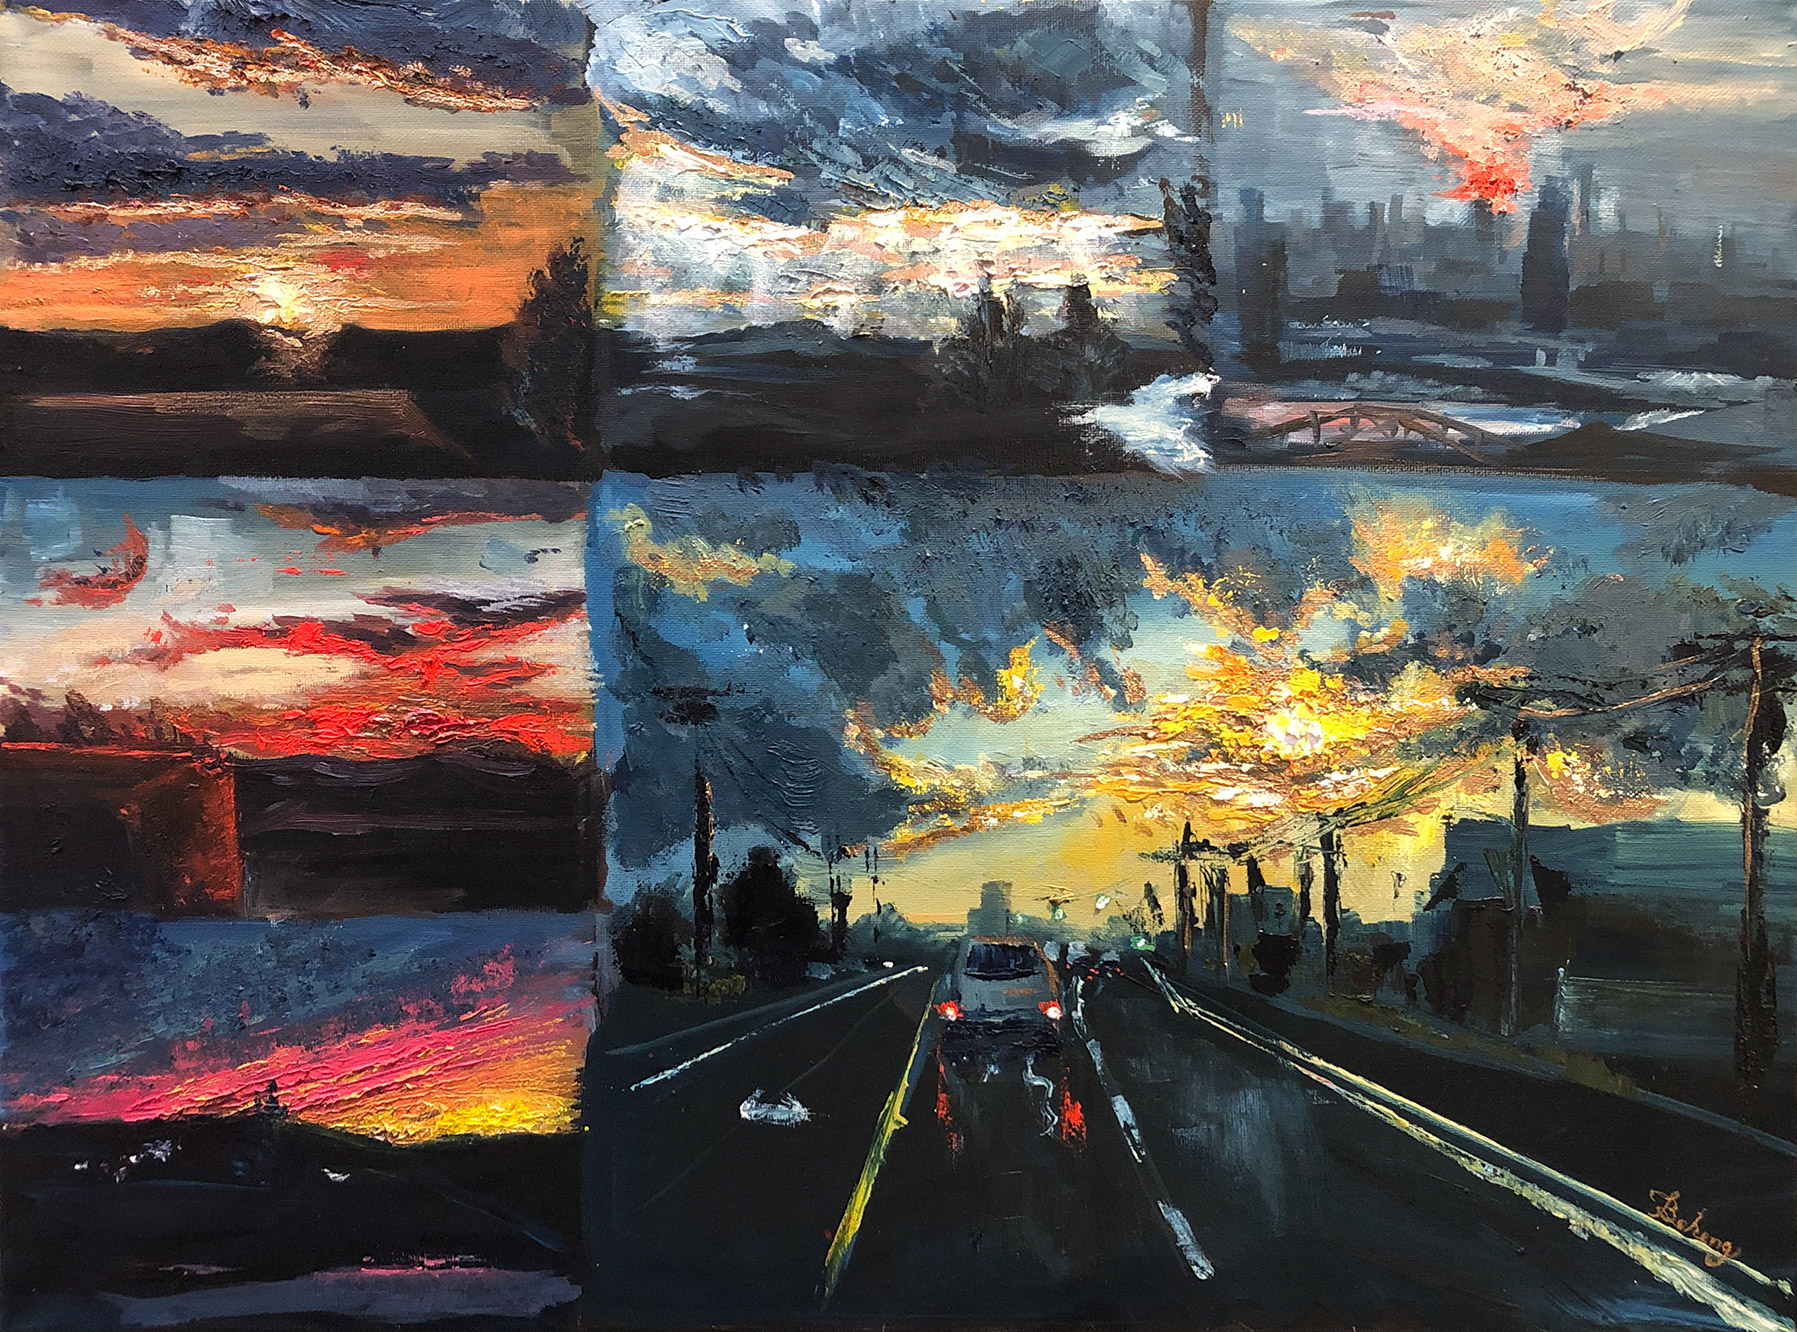 Painting of a variety of sunsets by Boheng Kou, "Delighted", Kents Hill School